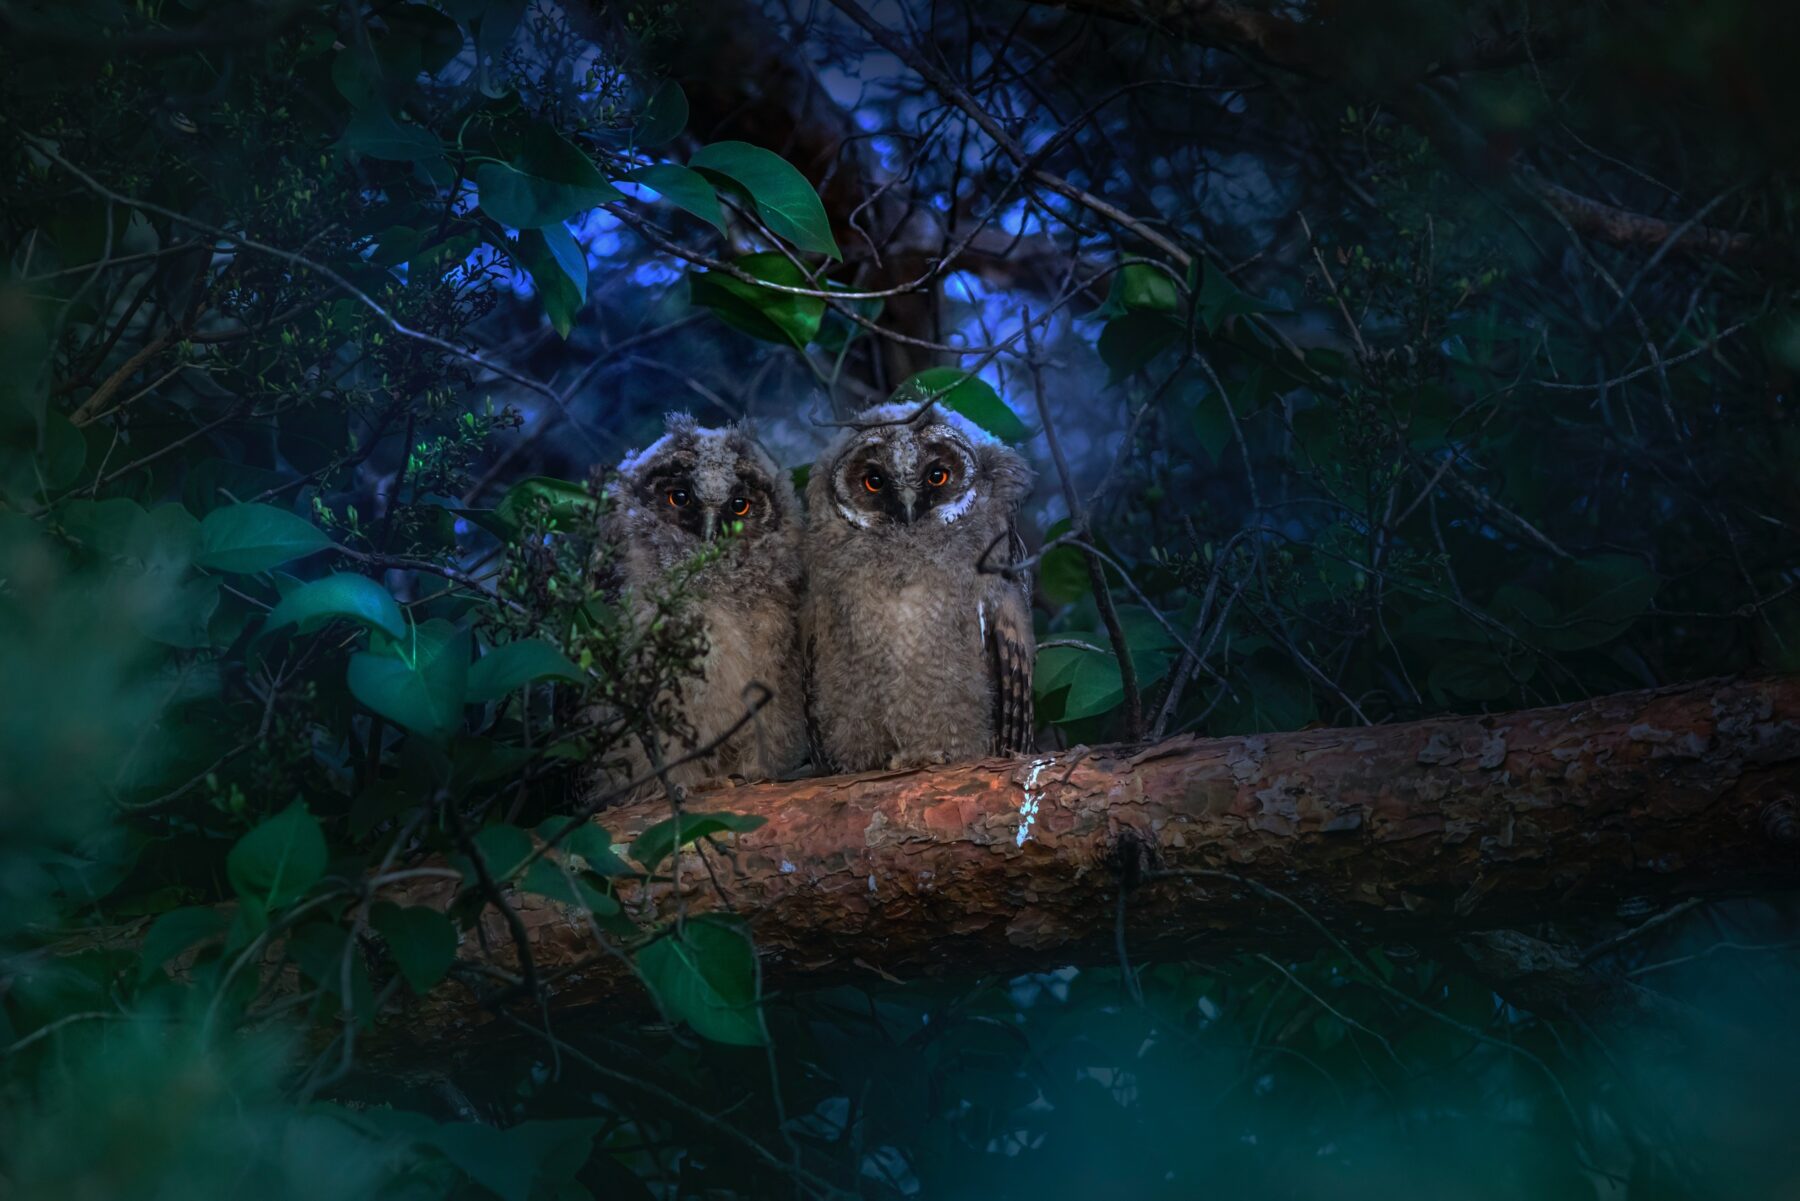 Two owlets sitting in a tree at night, surrounded by foliage.